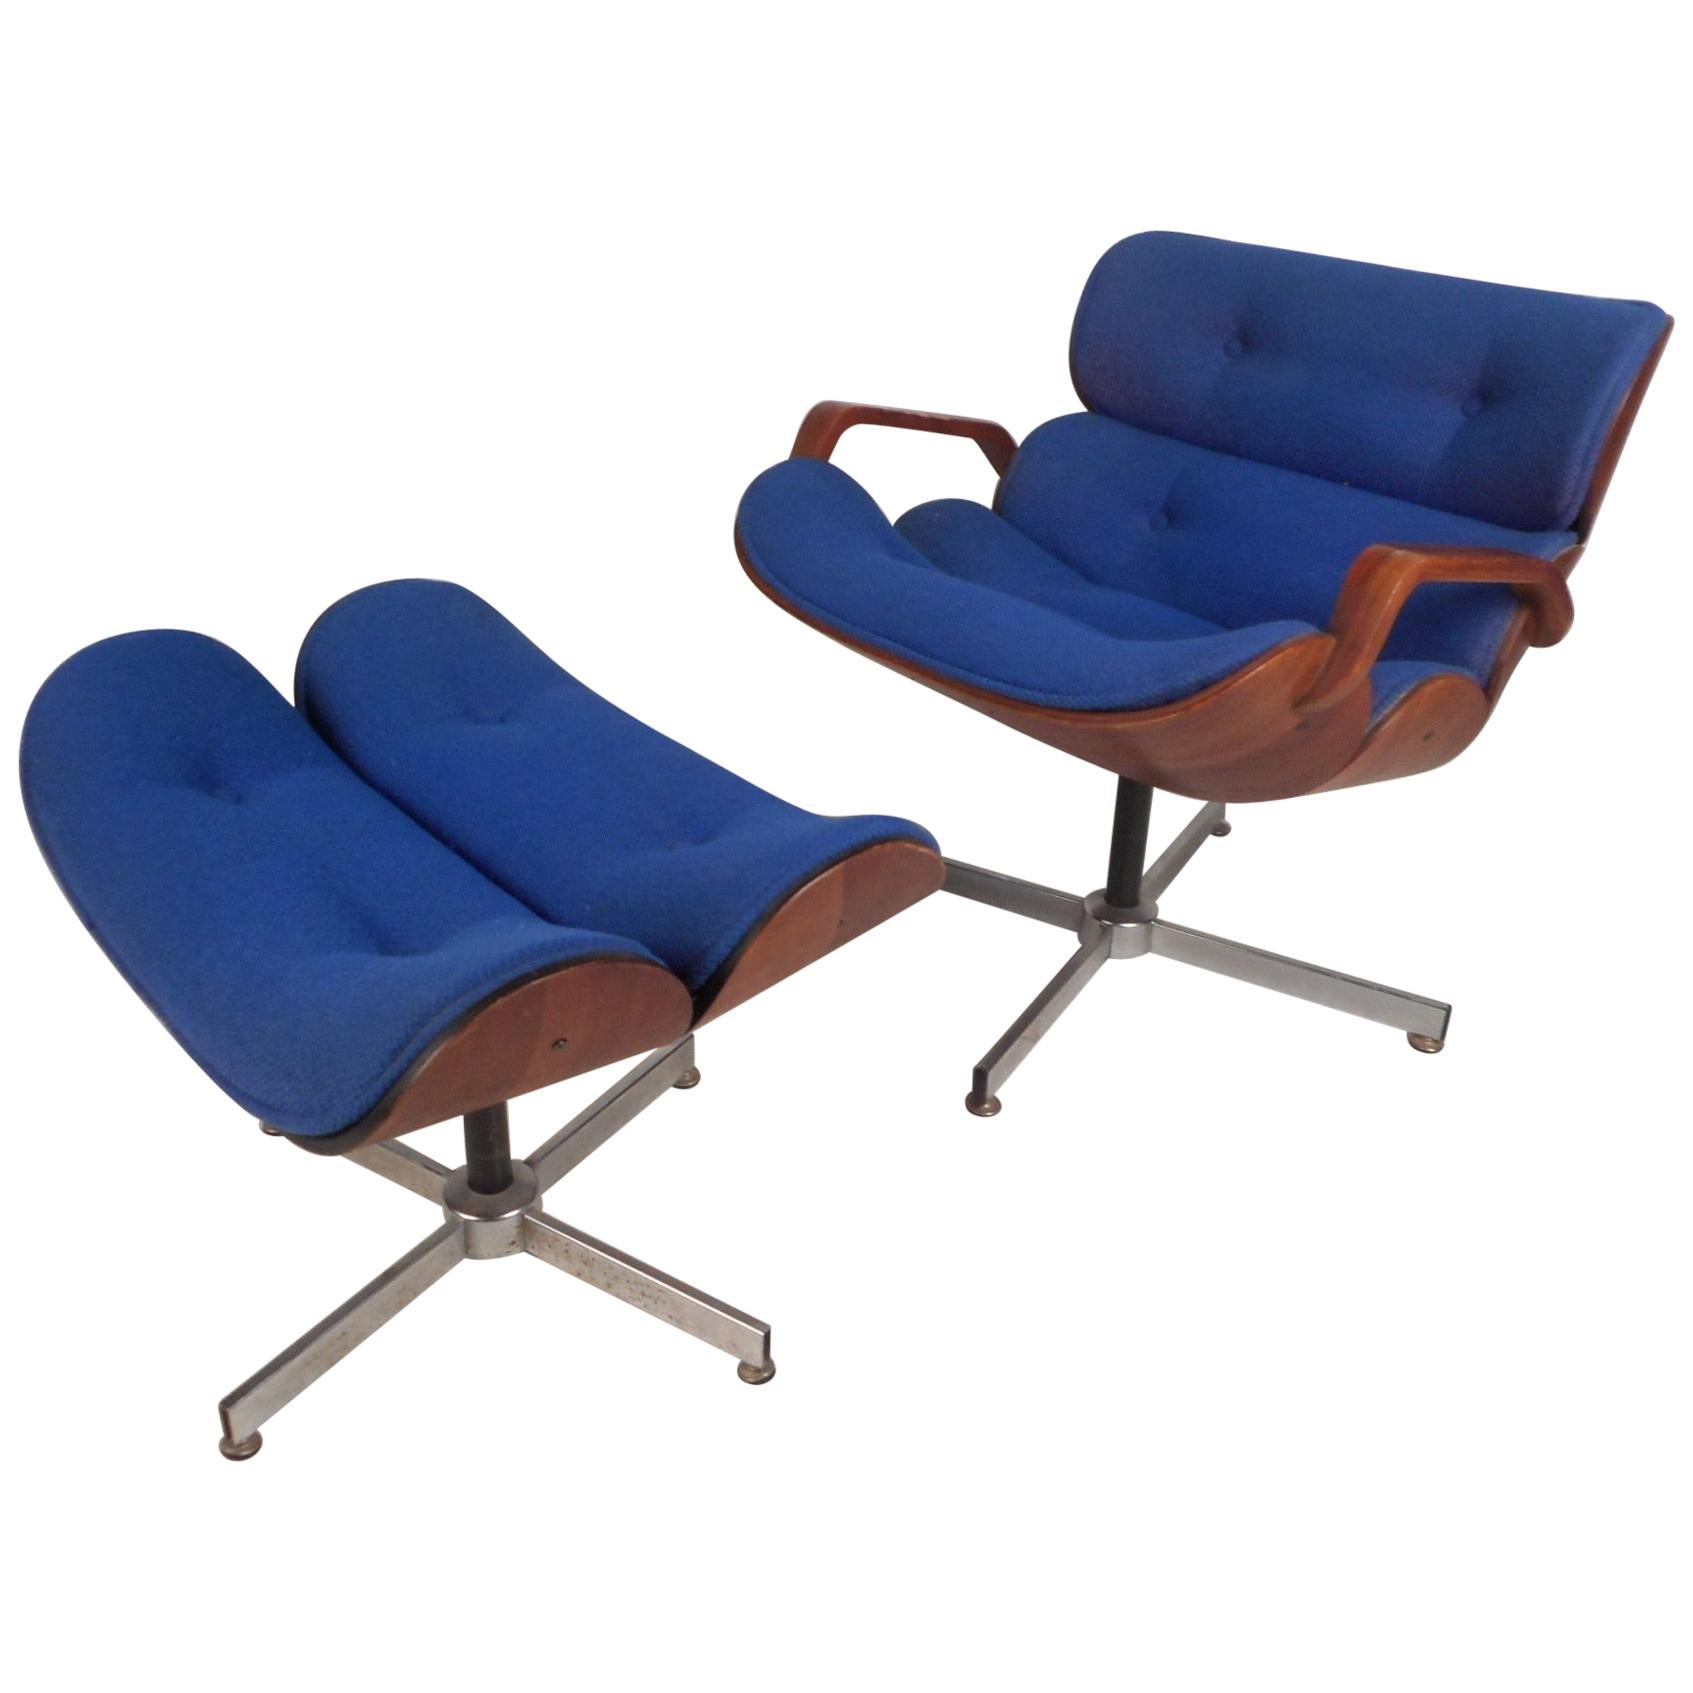 Mid-Century Modern Eames Style Swivel Lounge Chair and Ottoman